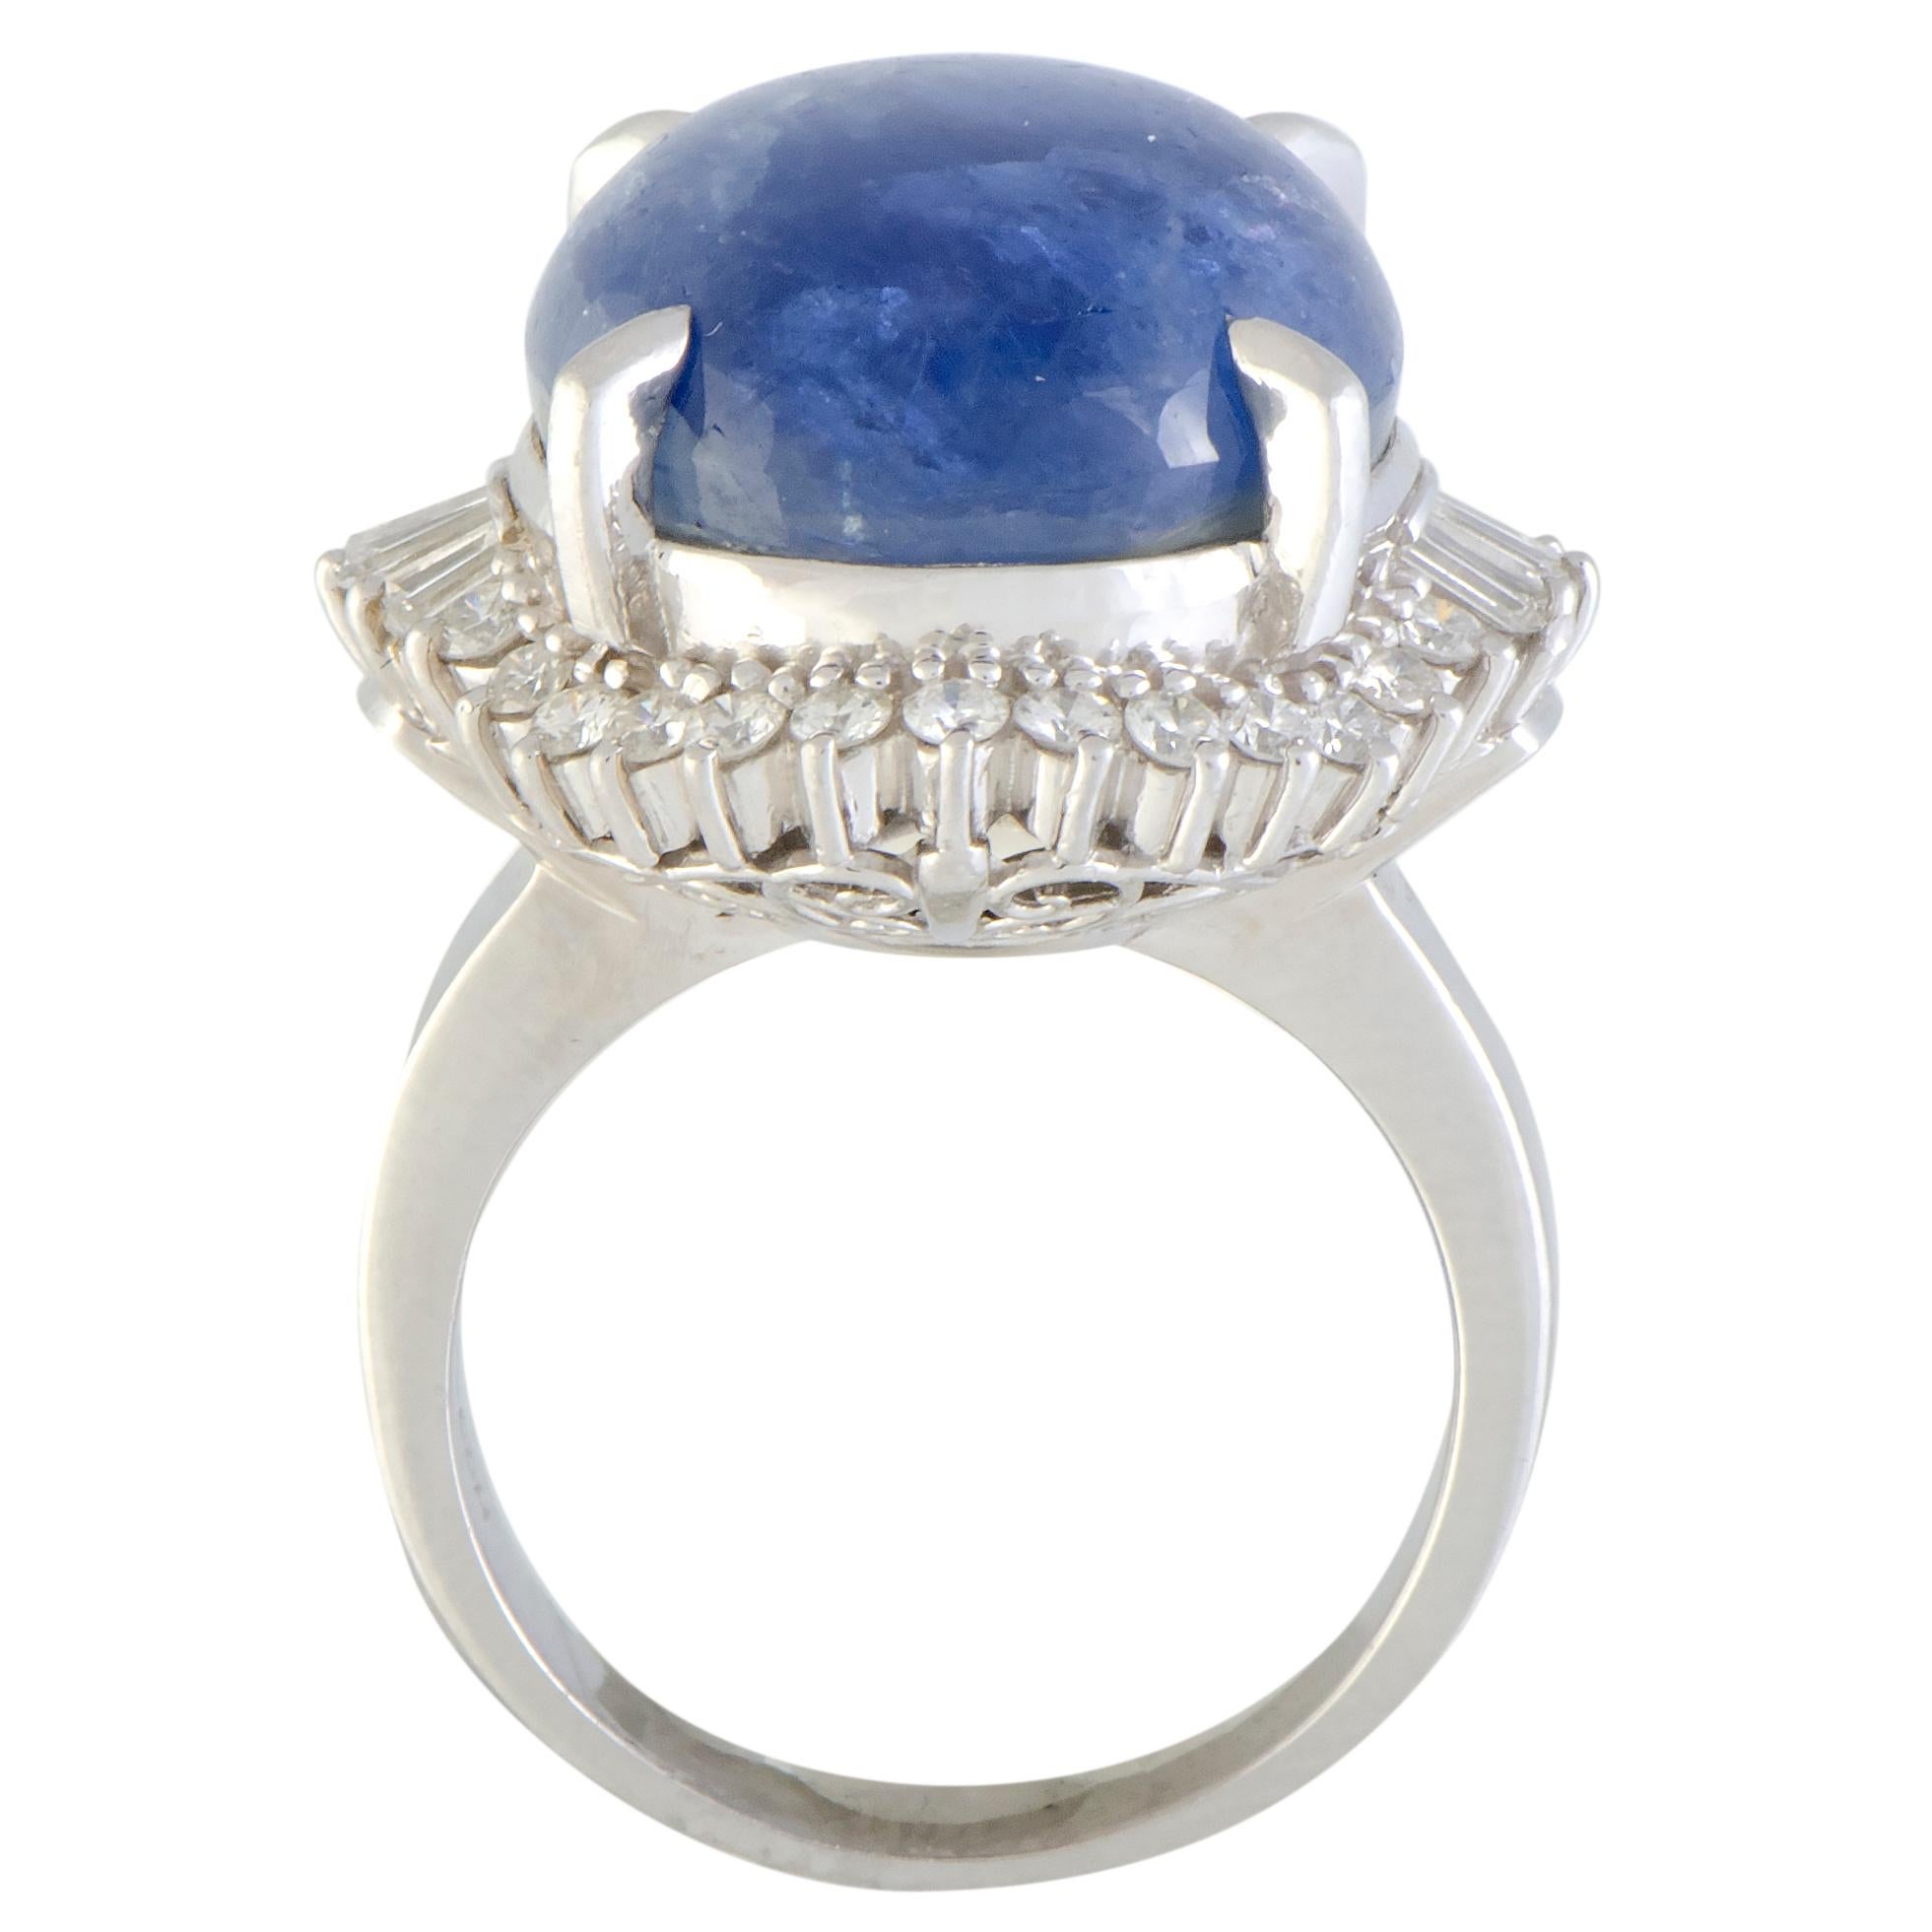 The compelling star sapphire takes the central place in this spectacular ring in a most imposing fashion, lending its spellbinding allure to the piece. The ring is expertly crafted from prestigious platinum and it is also set with diamonds that